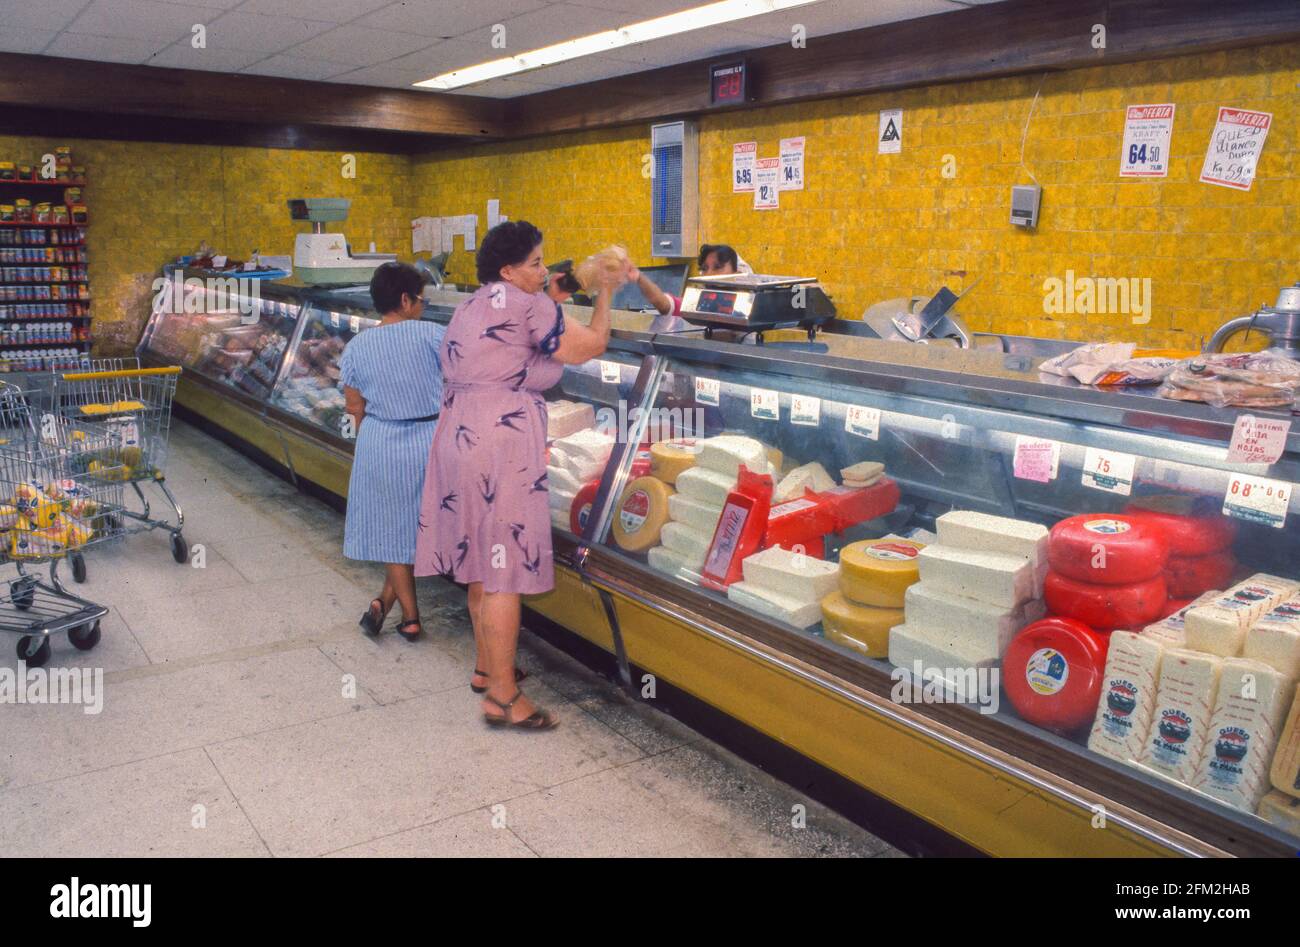 CARACAS, VENEZUELA, FEBRUARY 1988 - Women at cheese display, shopping in food store. Stock Photo